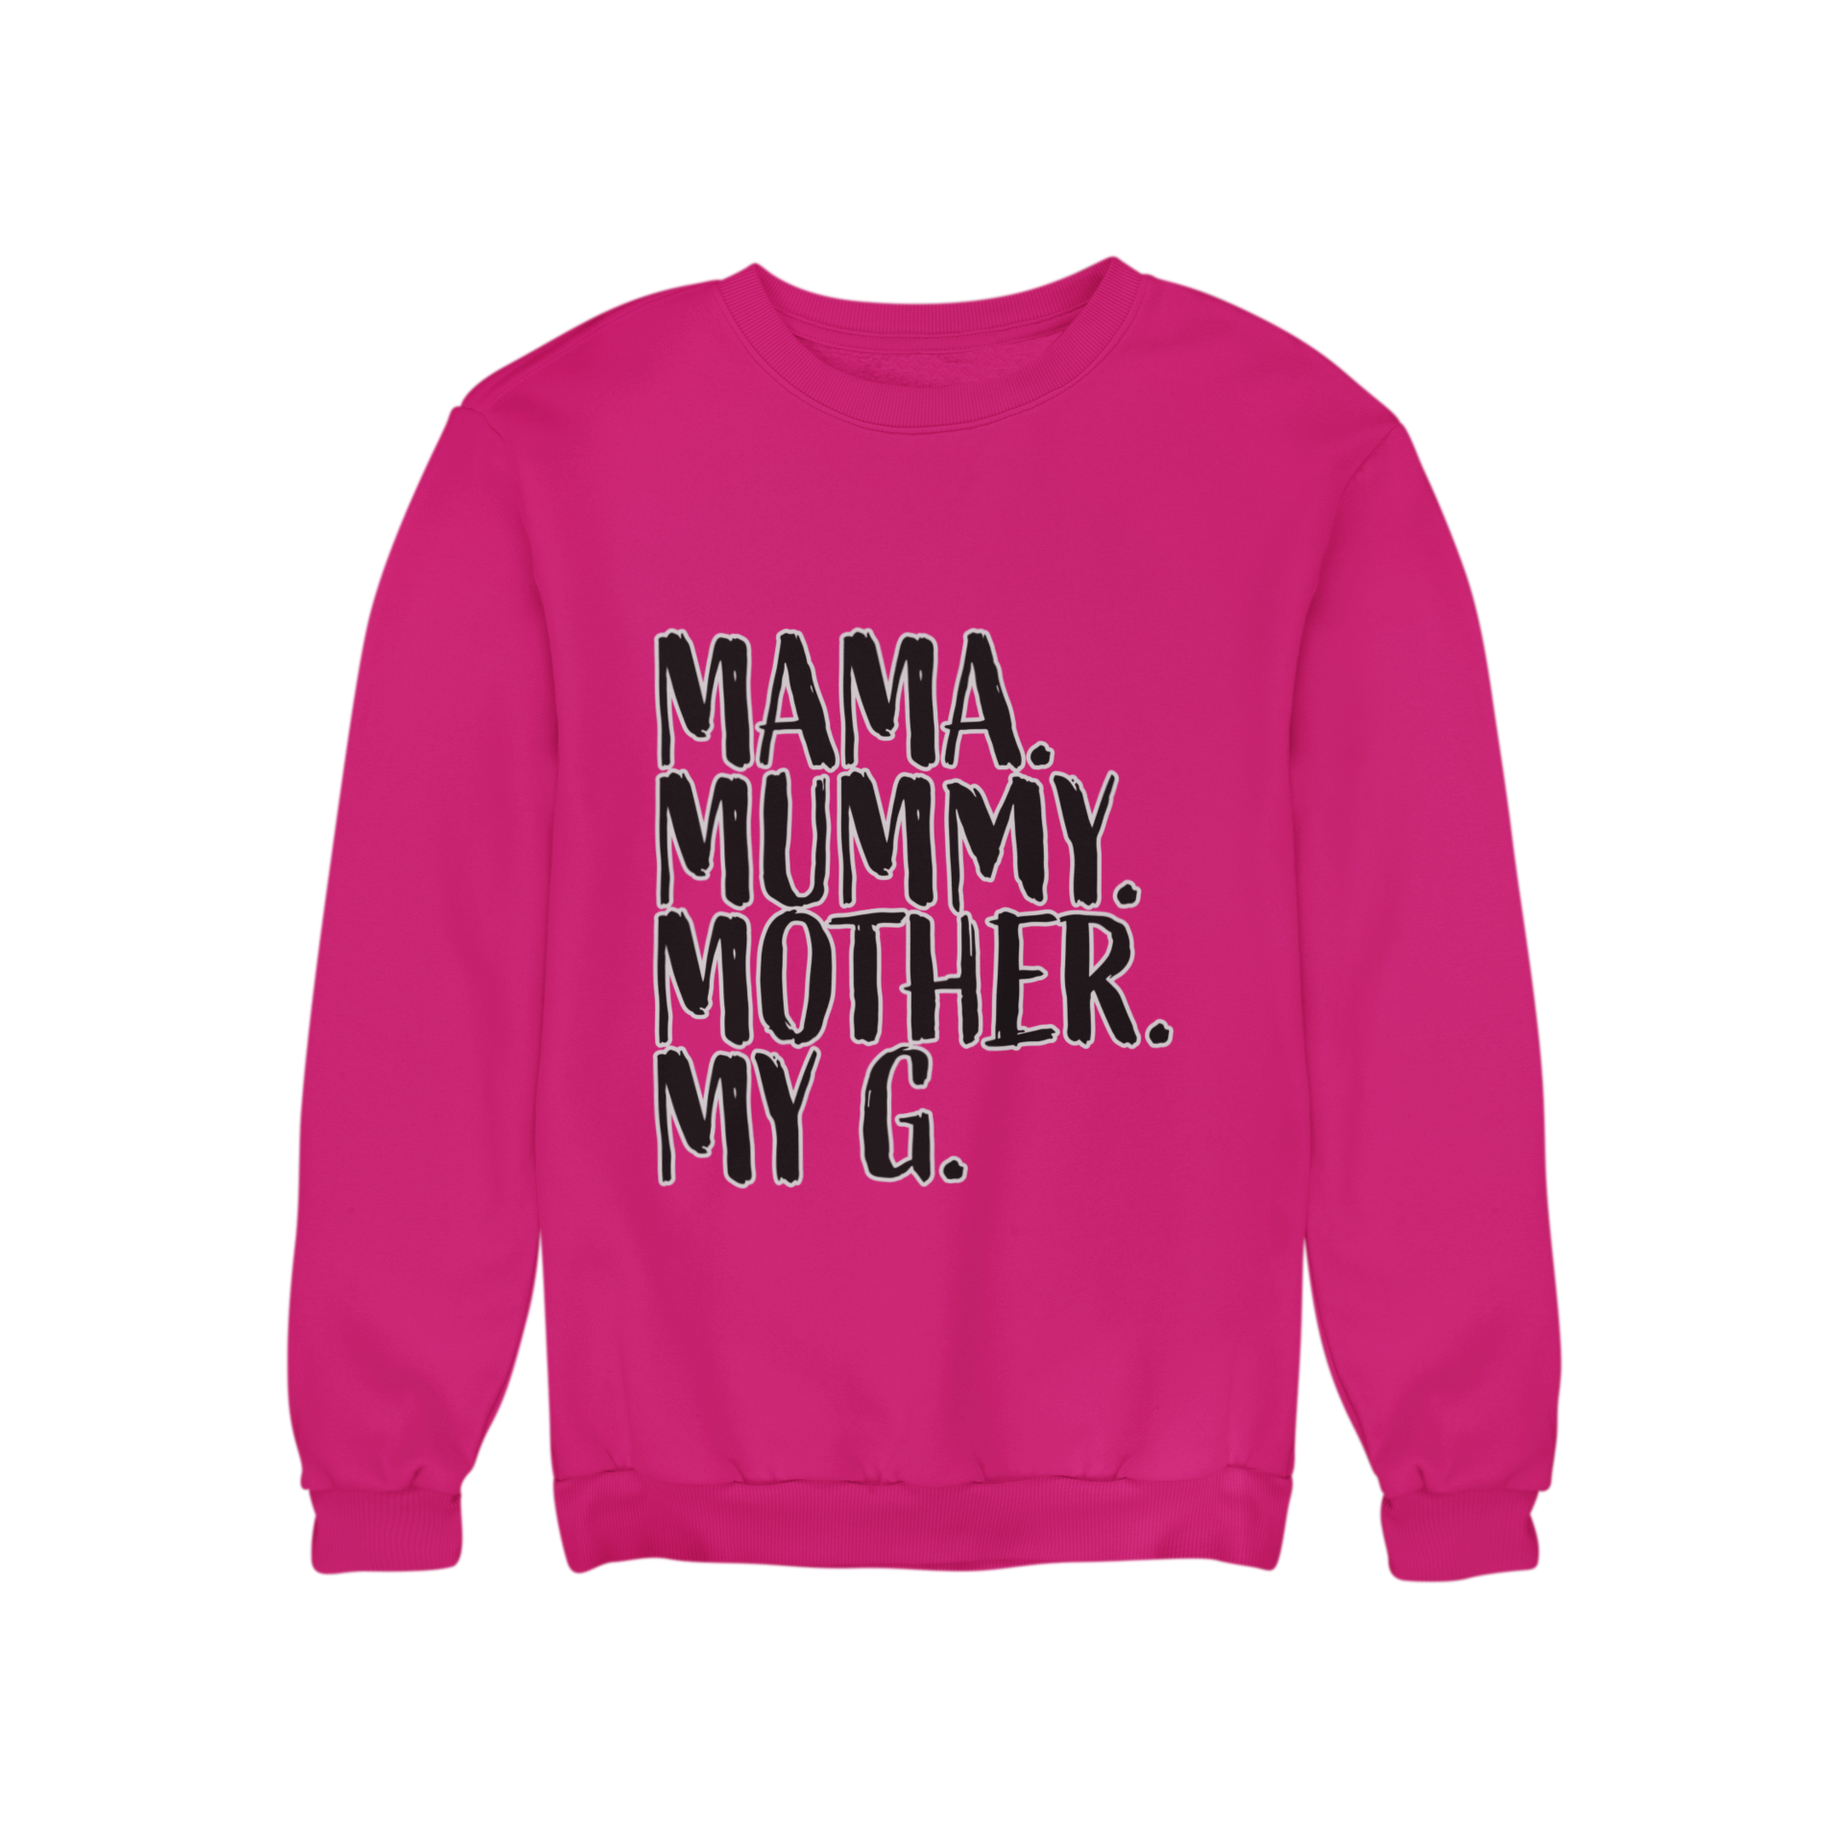 Elevate your mum game with teevolution's trendy sweatshirt featuring the catchy saying "Mama Mummy Mother My G." Stay stylish and cozy while proudly celebrating the superwoman you are. Get yours today and rock that mum life!